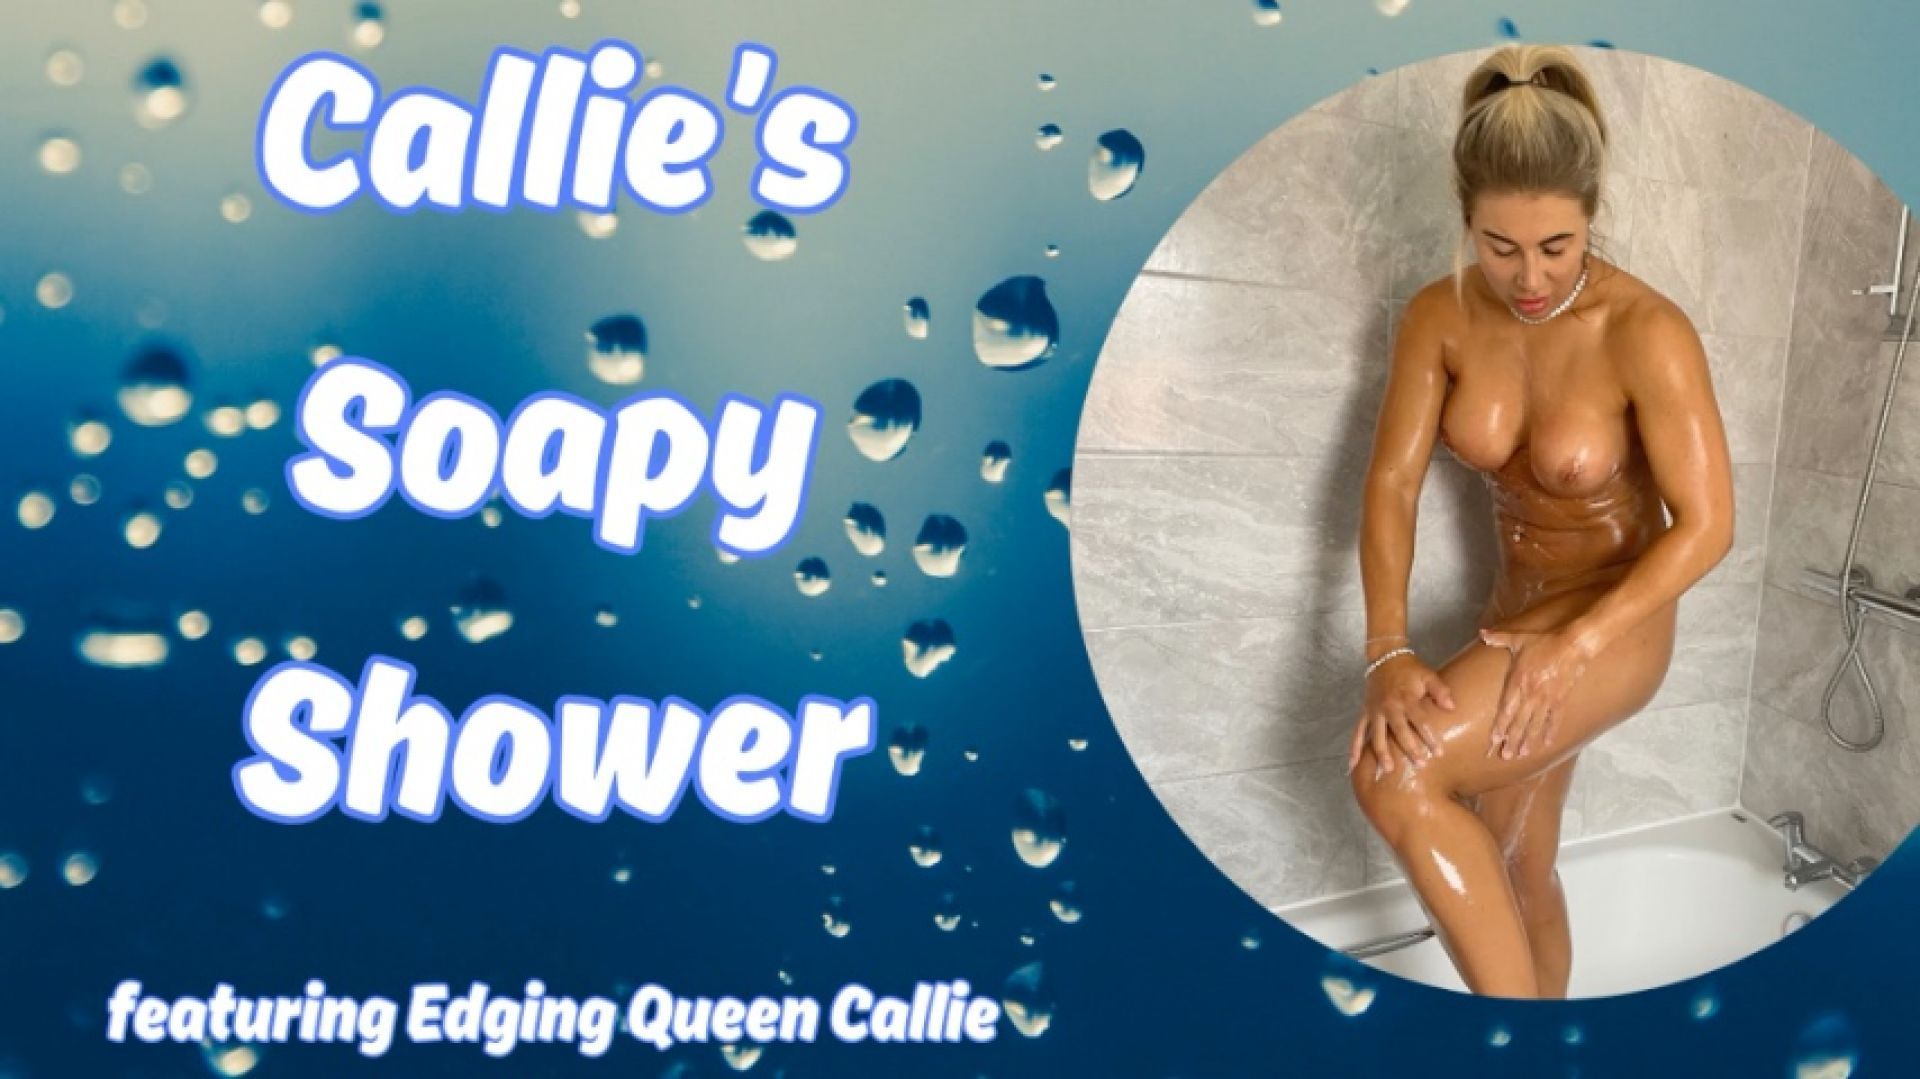 callies soapy shower cleaning the bath tub